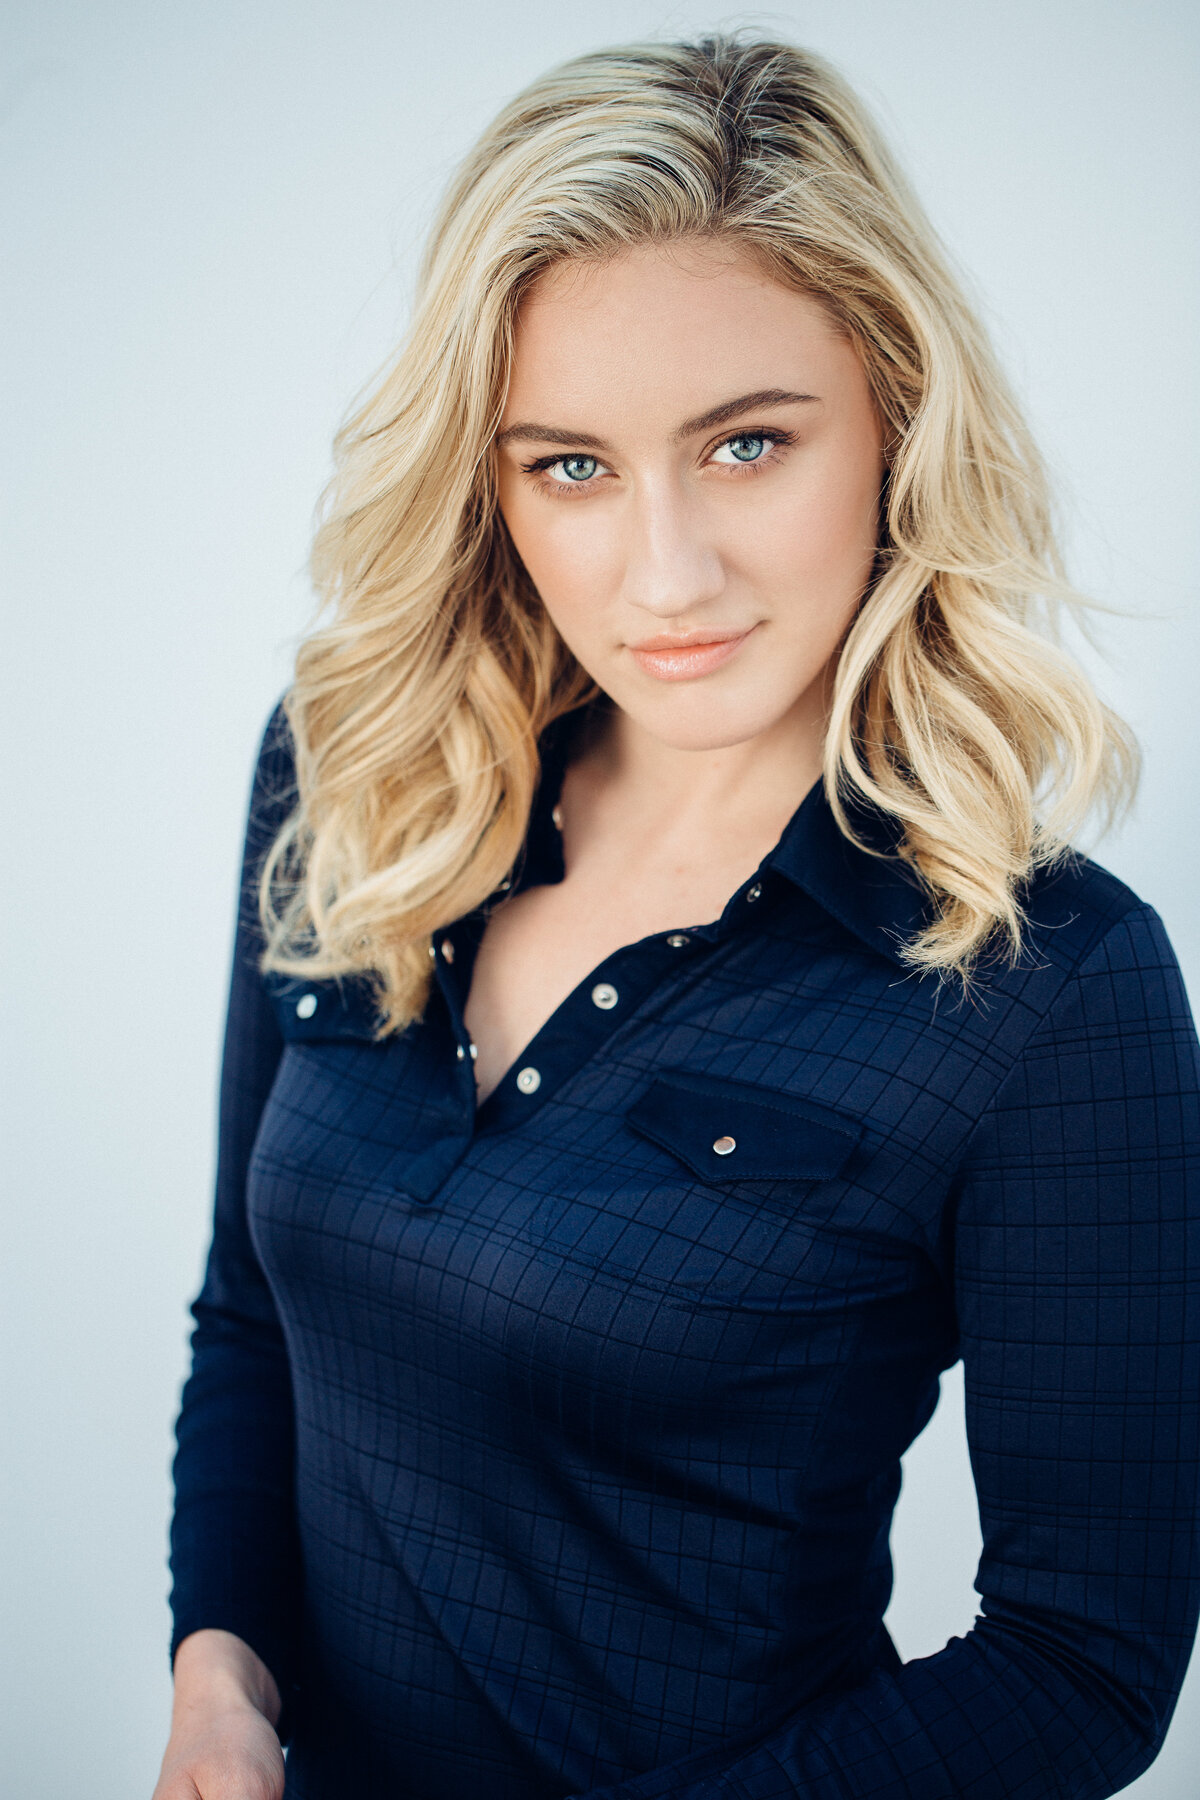 Headshot Photograph Of Young Woman In Black Long Sleeves Los Angeles